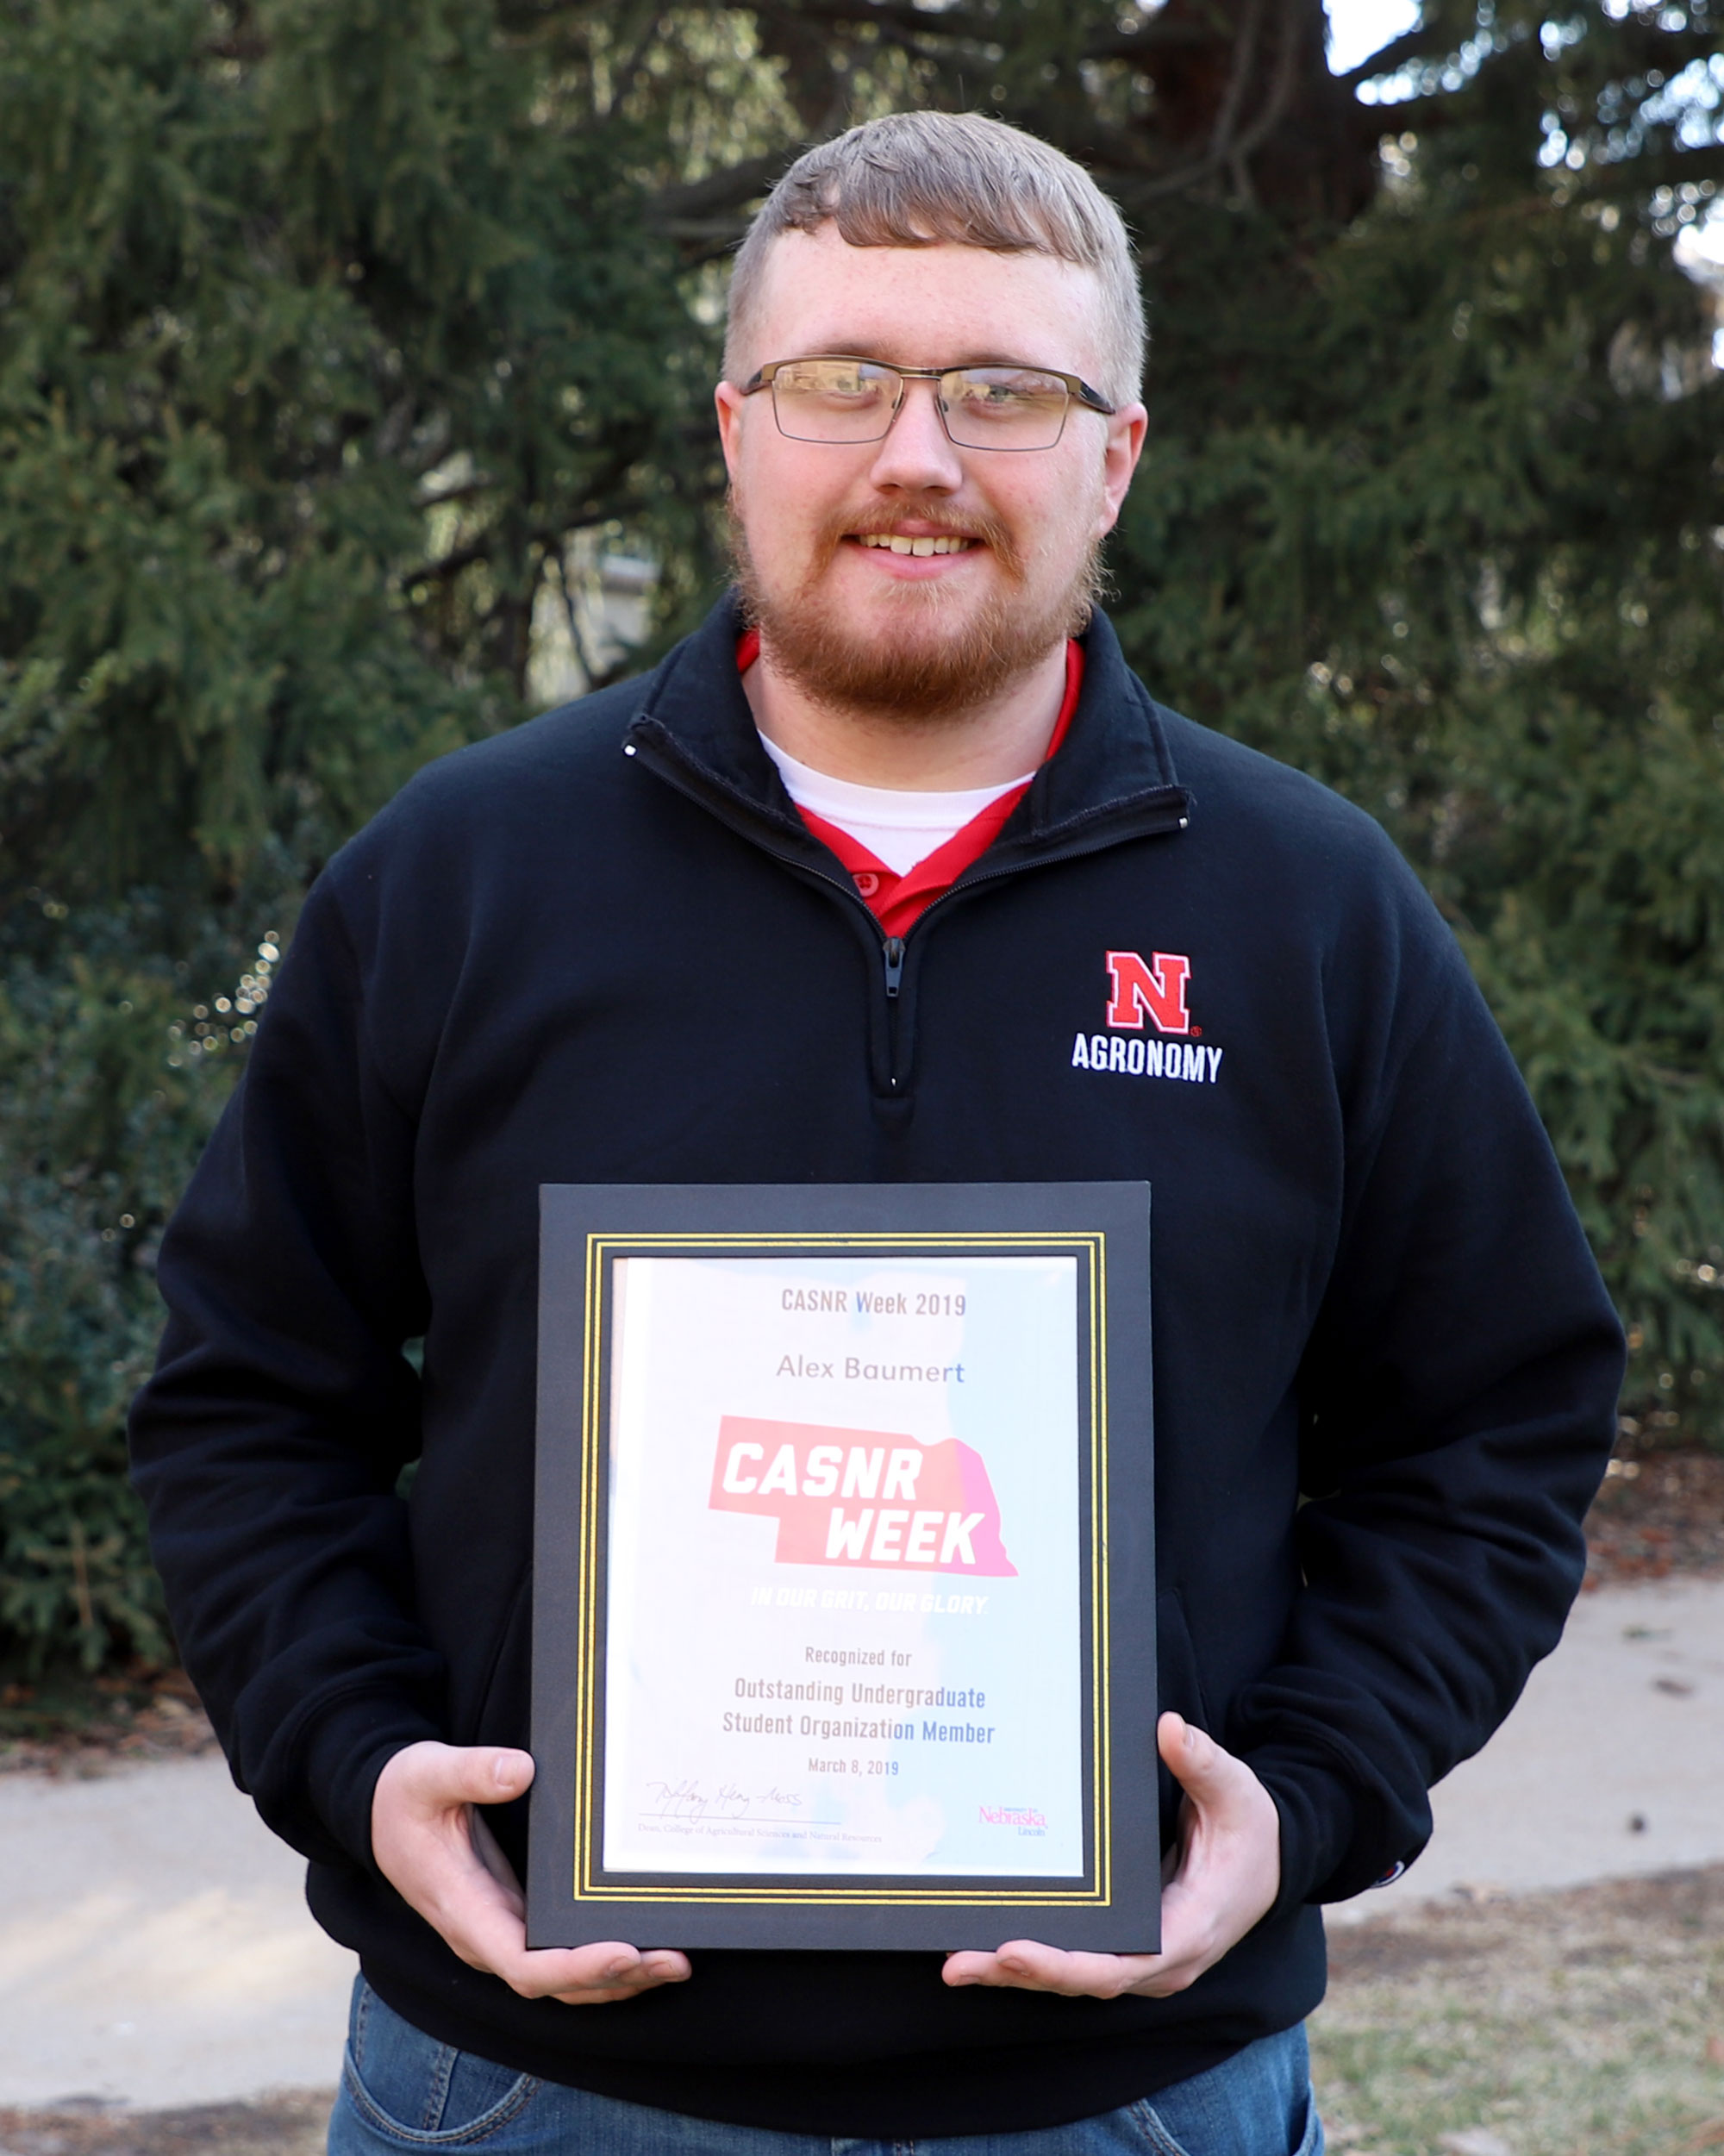 Alex Baumert, an agronomy sophomore, received the Outstanding Undergraduate Student Organization Member Award. 